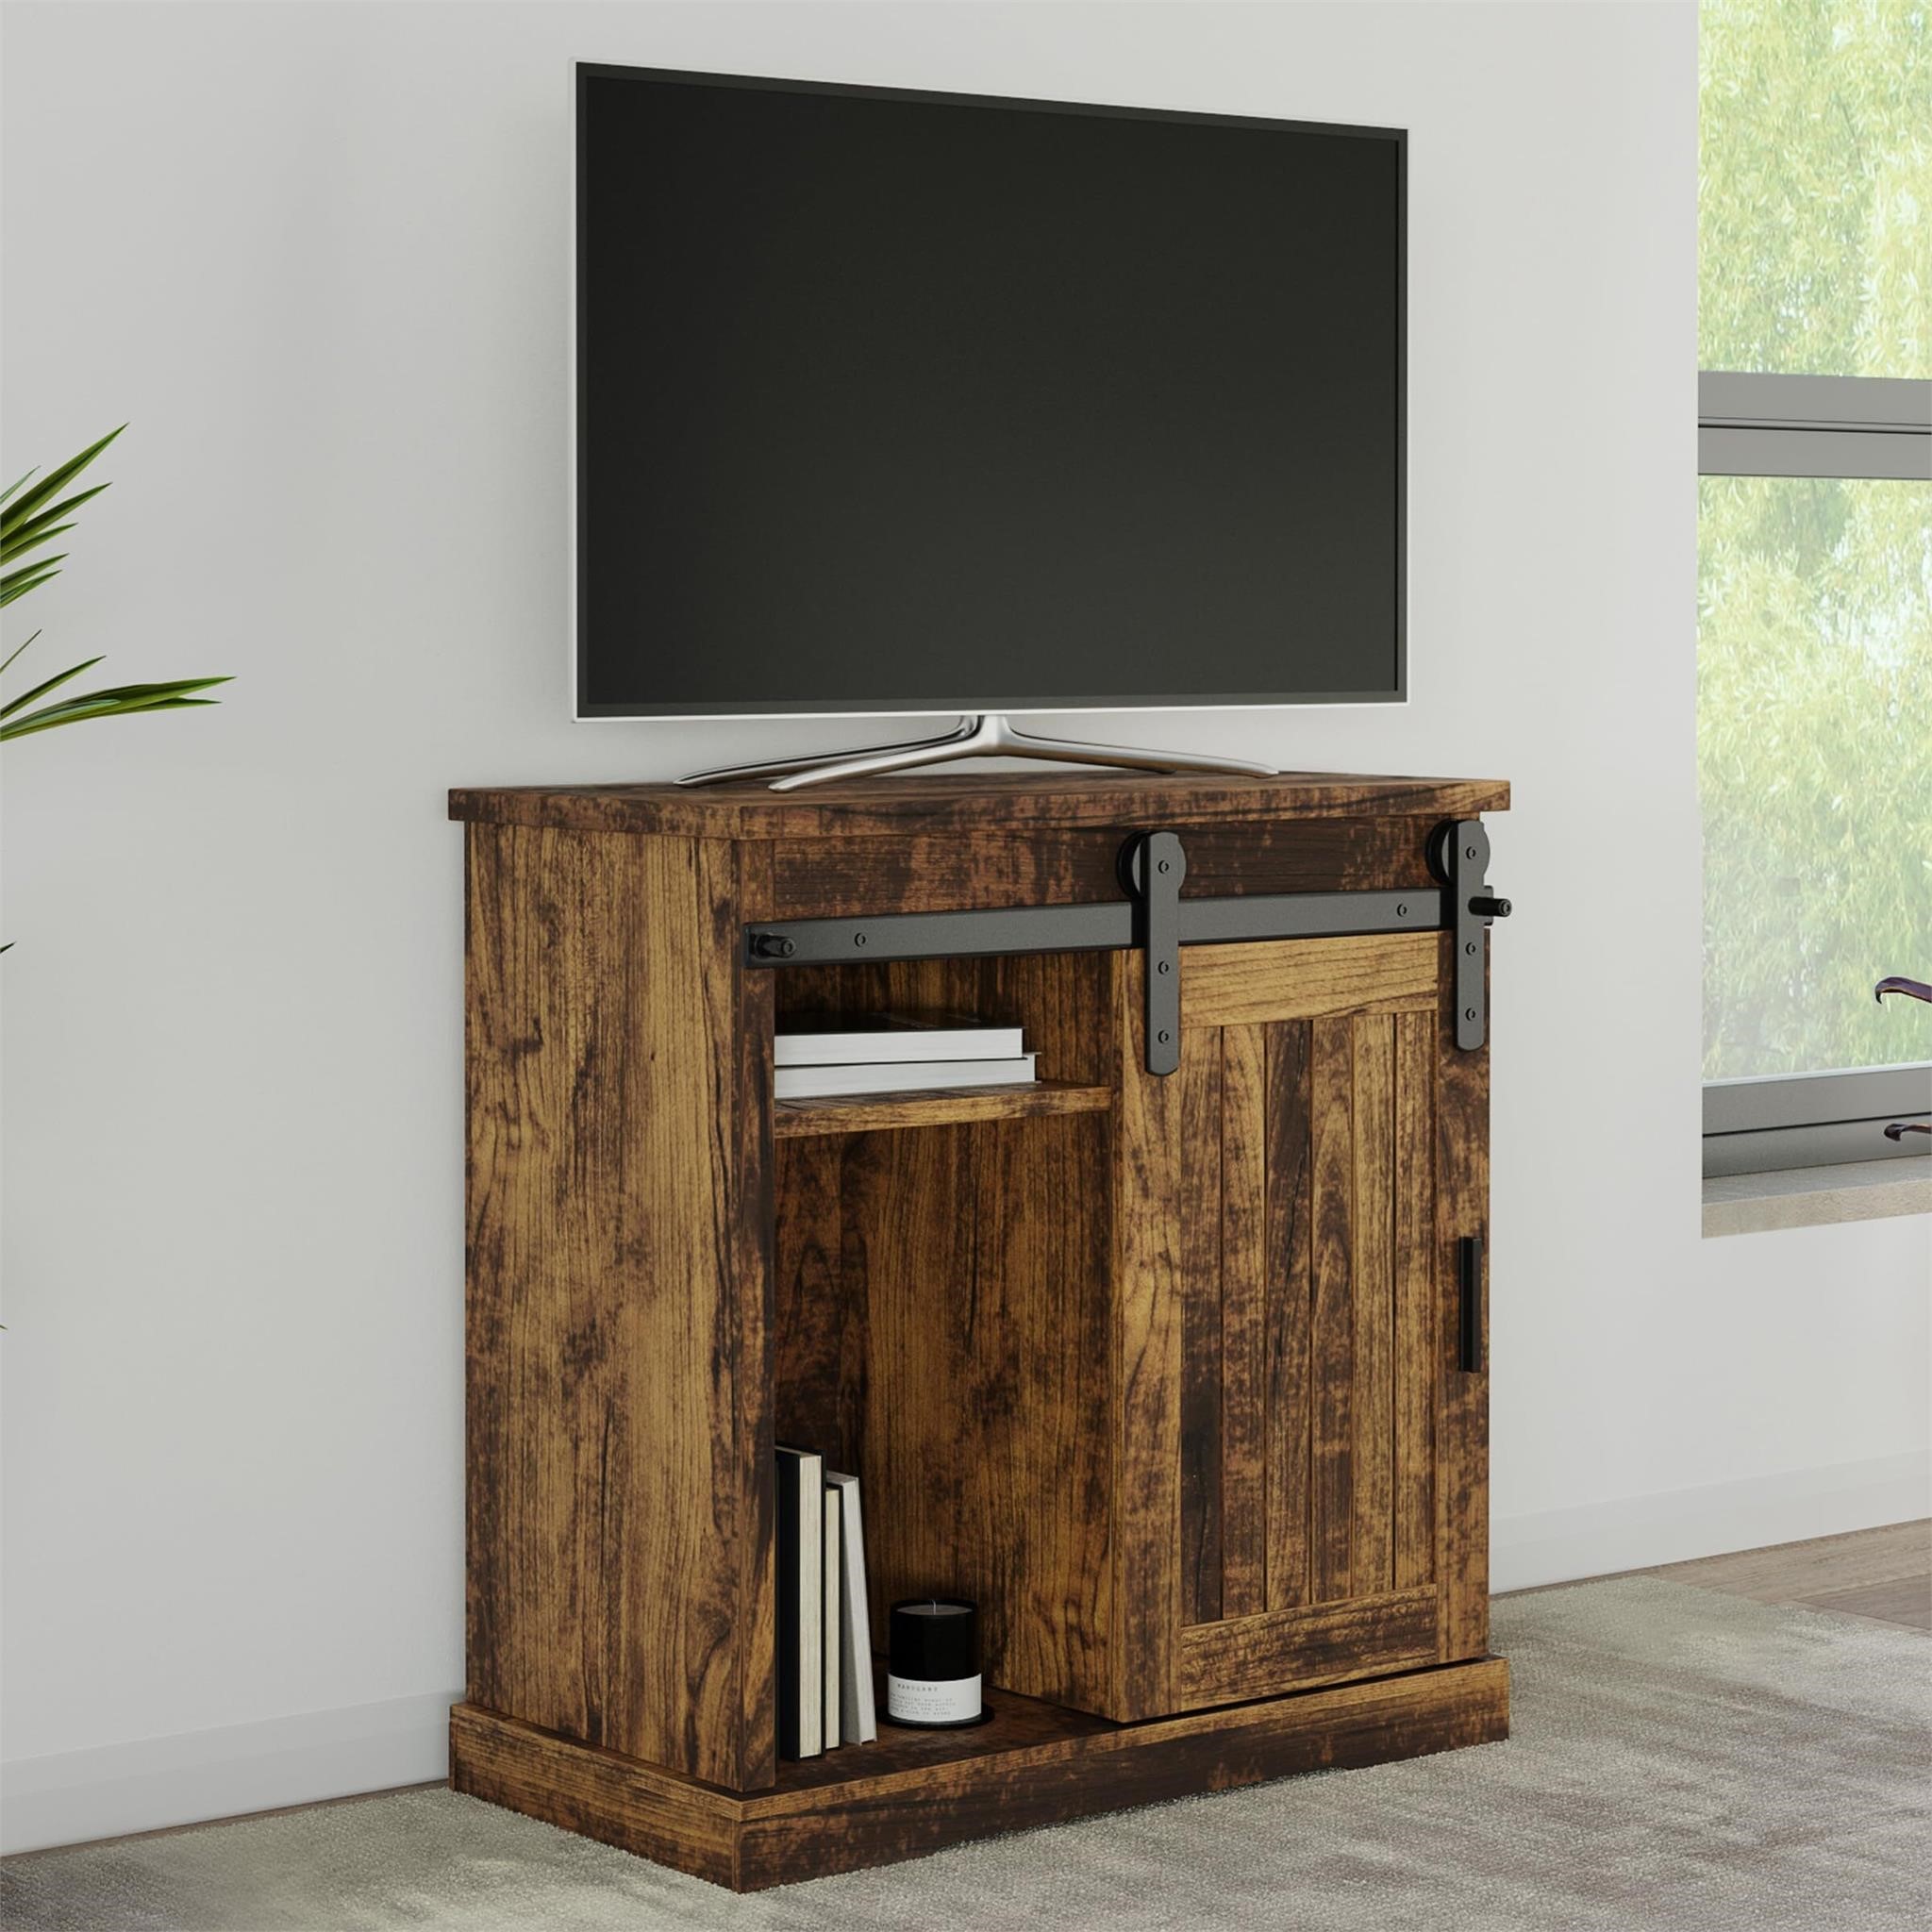 Lavish Home TV Stand Entertainment Center with